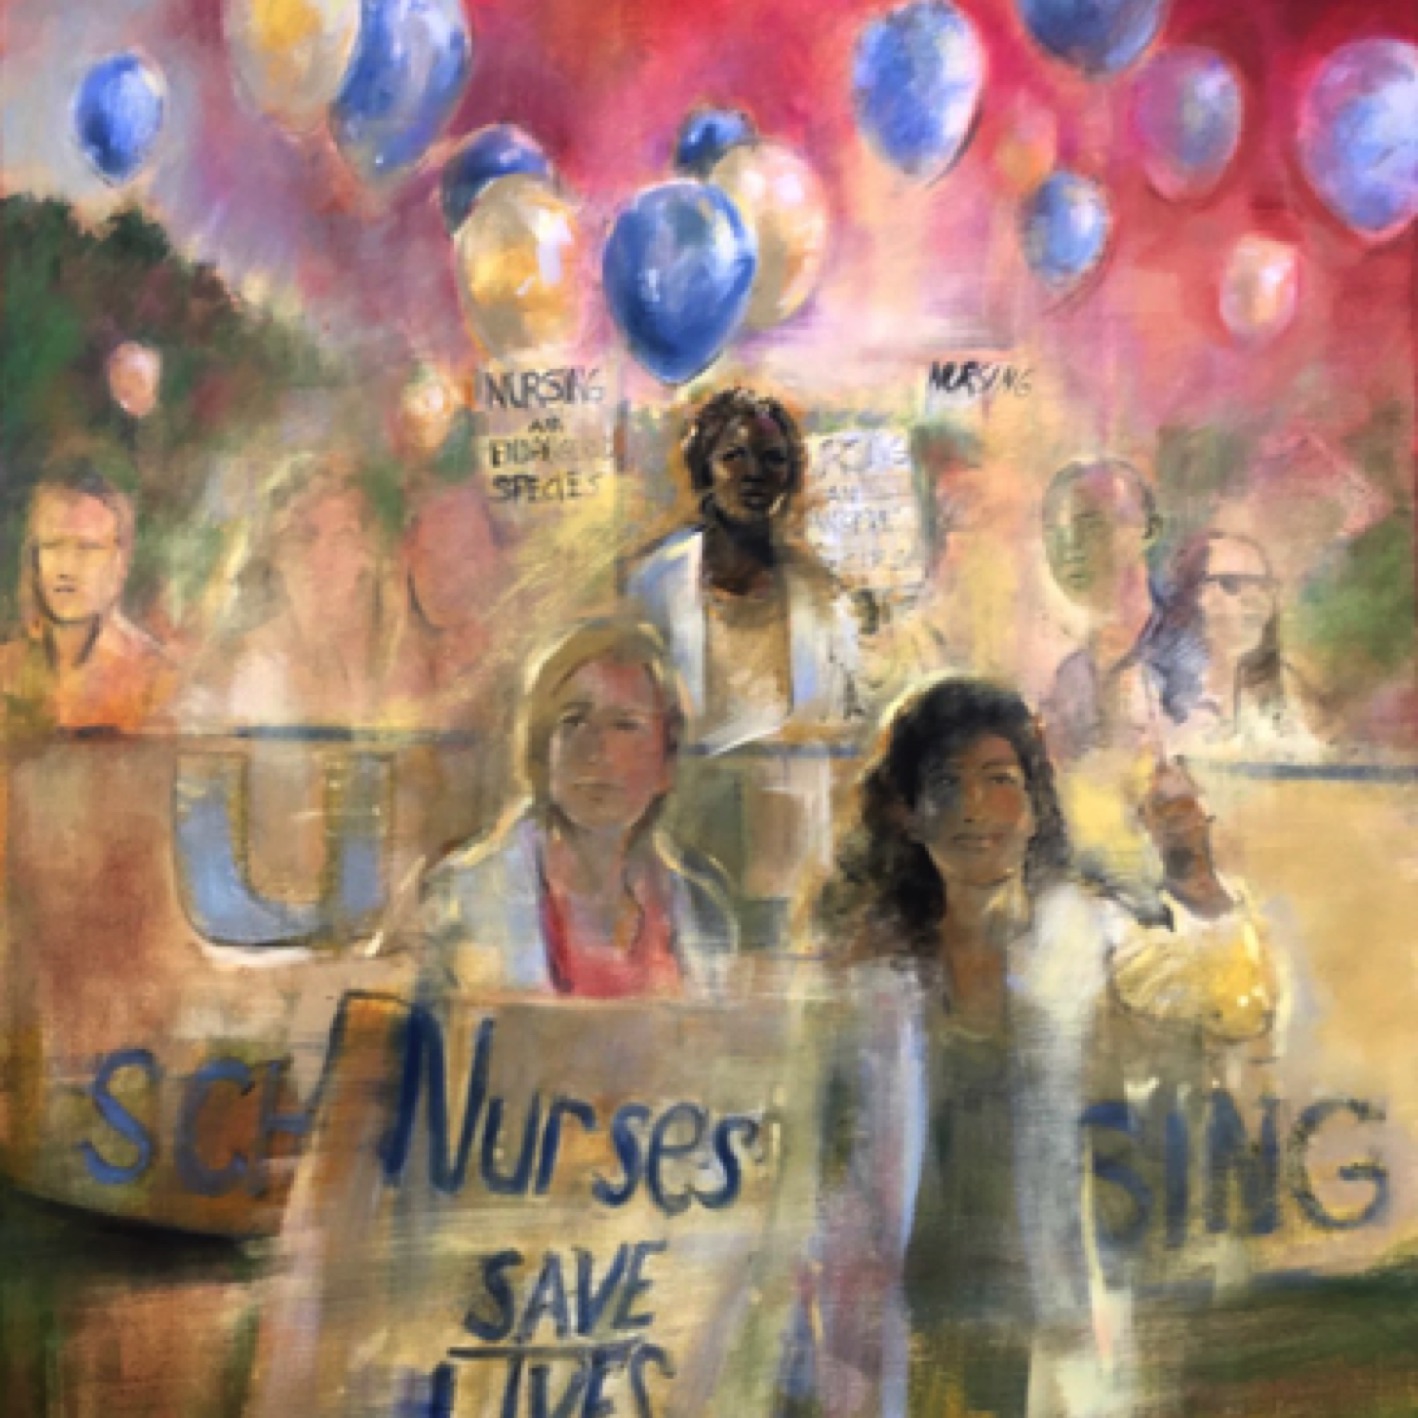 Gregg Chadwick
Nurses Save Lives - Marching to Save the School
60”x48” oil on linen 2019
UCLA School of Nursing Collection